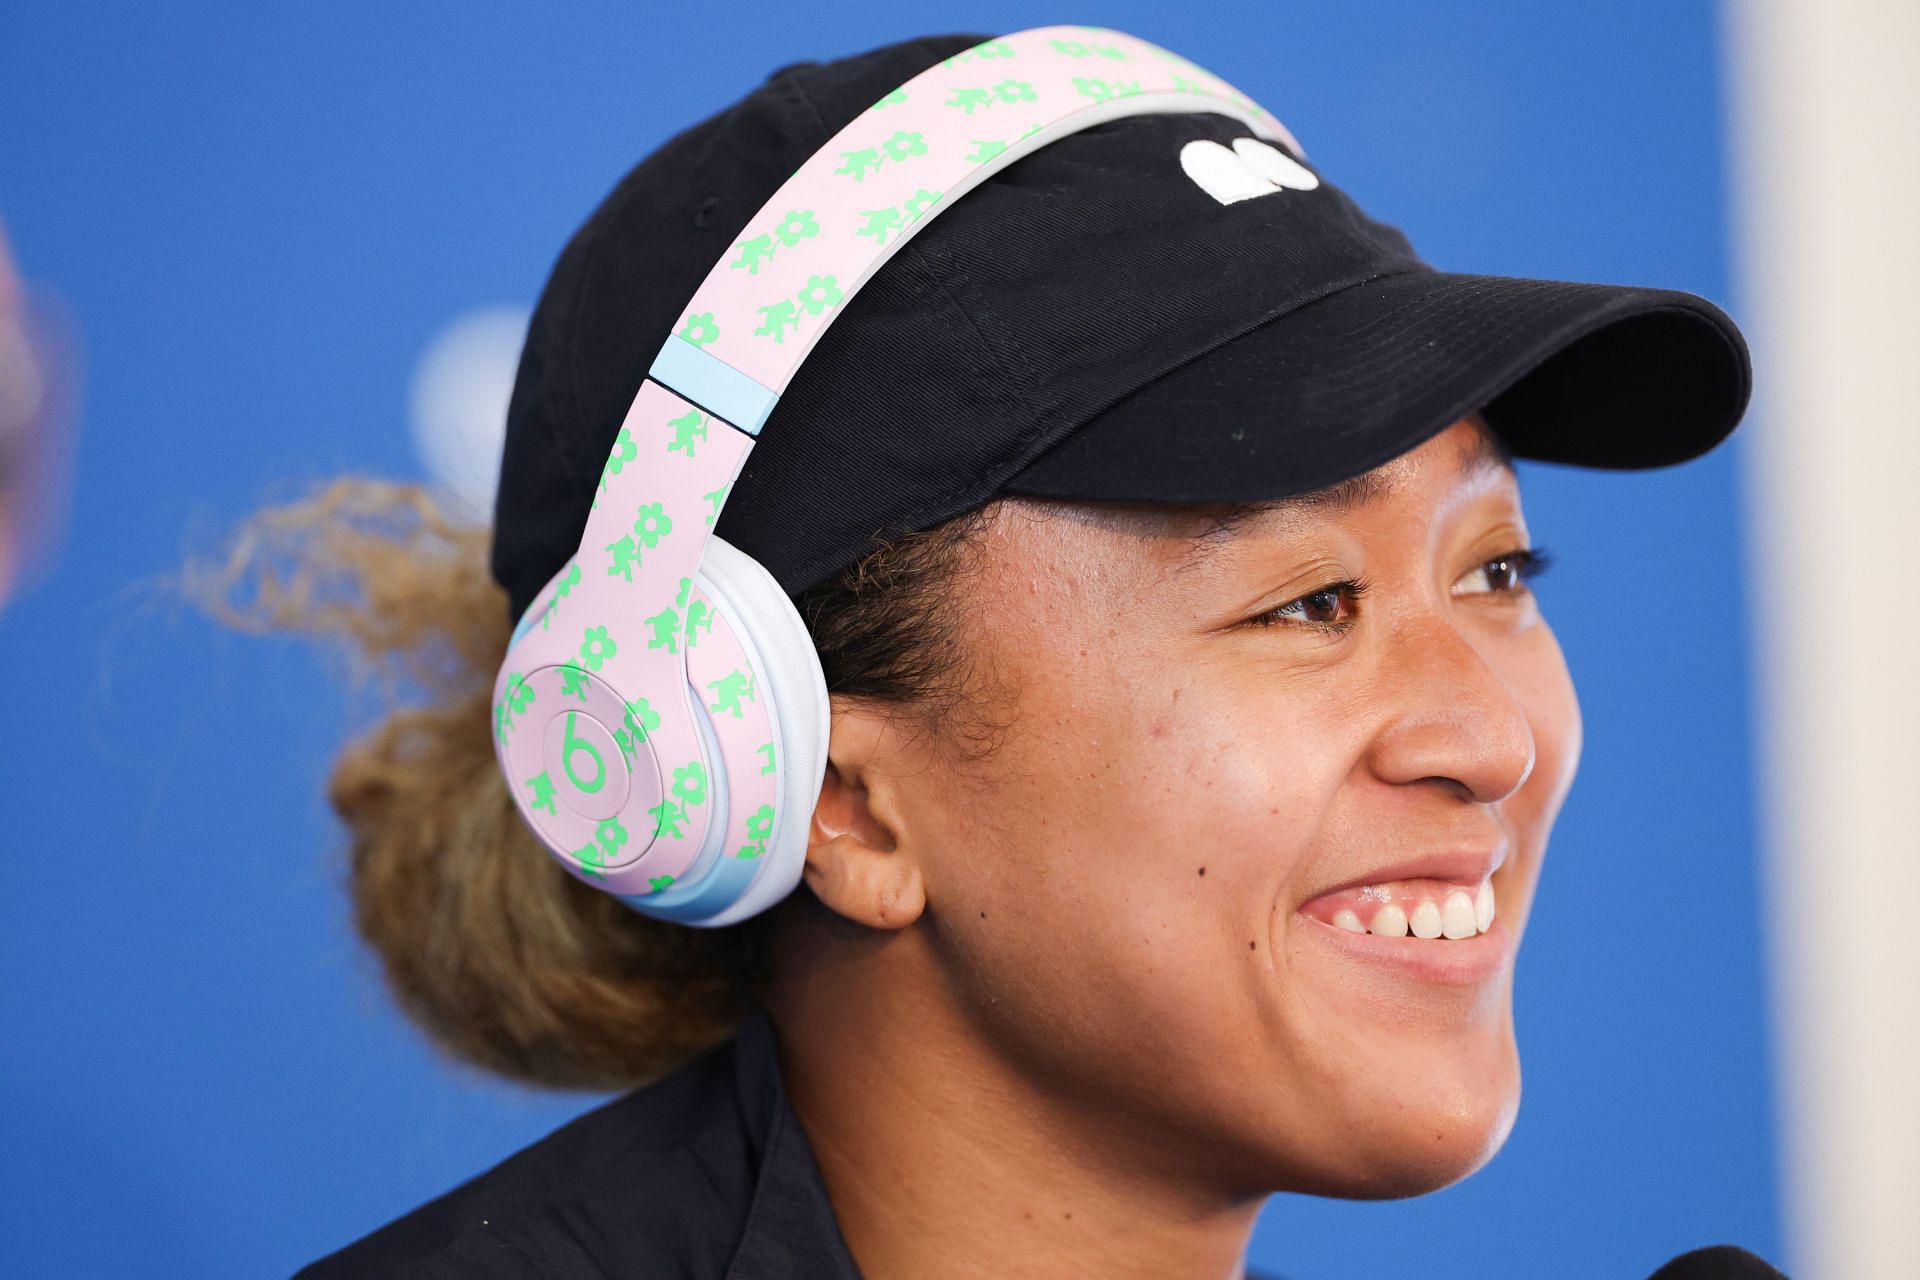 Naomi Osaka looks stunning in this sun-kissed picture - Photogallery